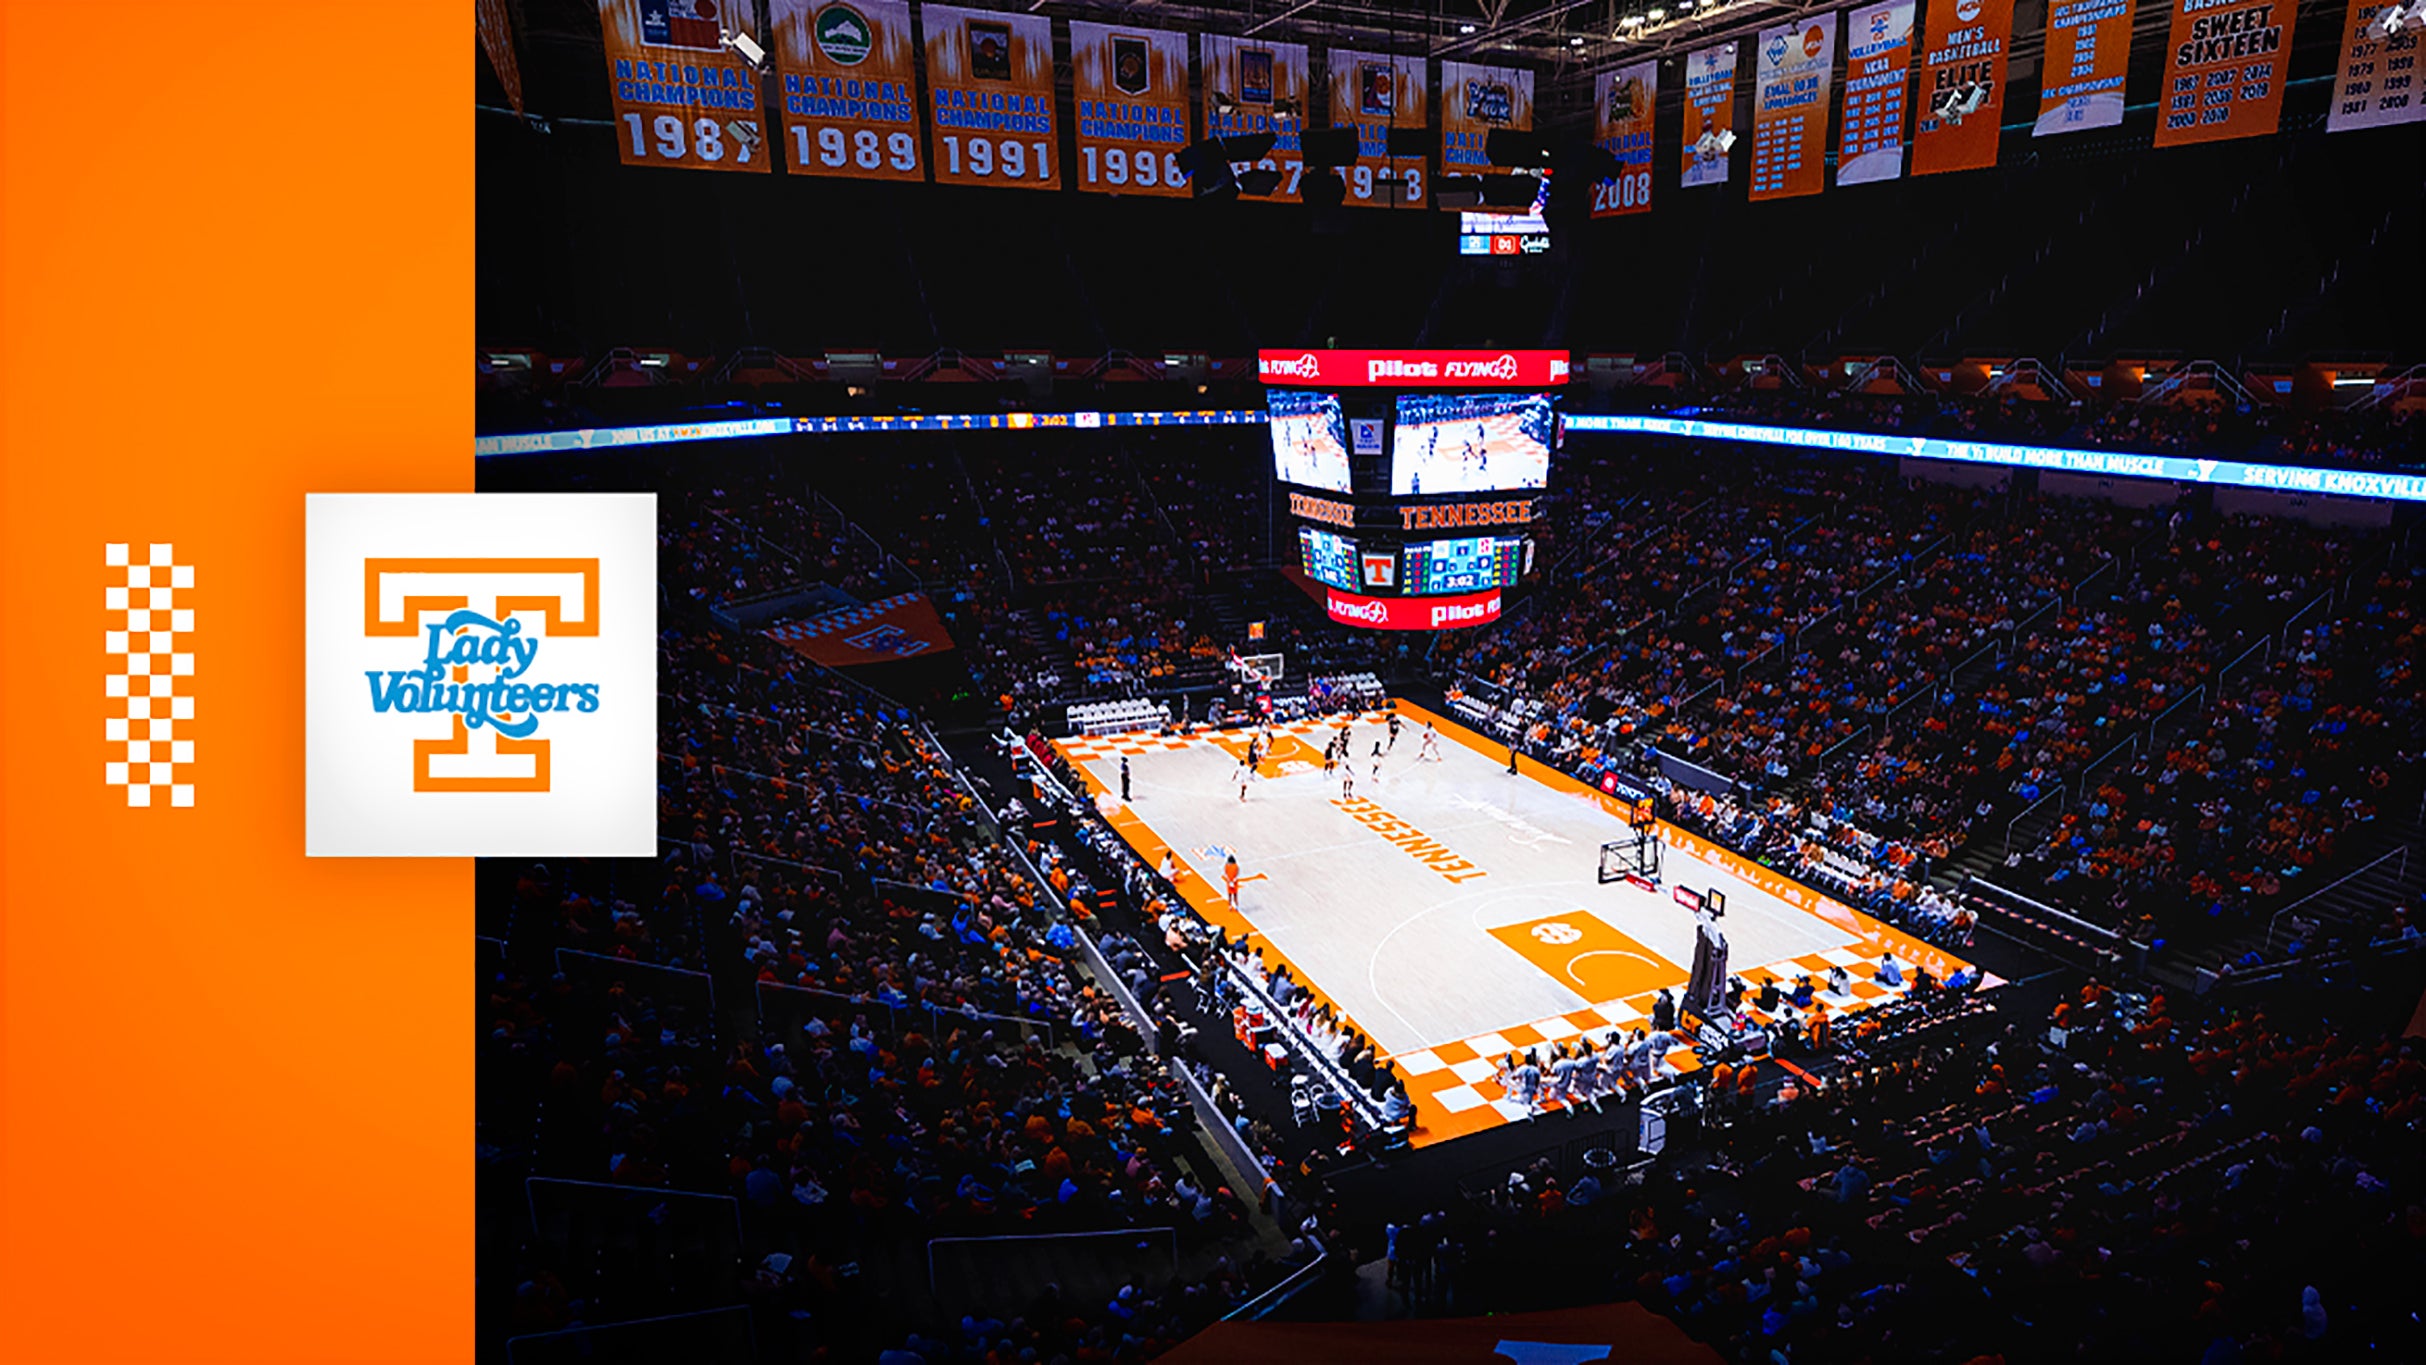 Tennessee Lady Volunteers Women's Basketball vs. Vanderbilt Commodores Womens Basketball in Knoxville promo photo for Shareholder & Top 100 presale offer code